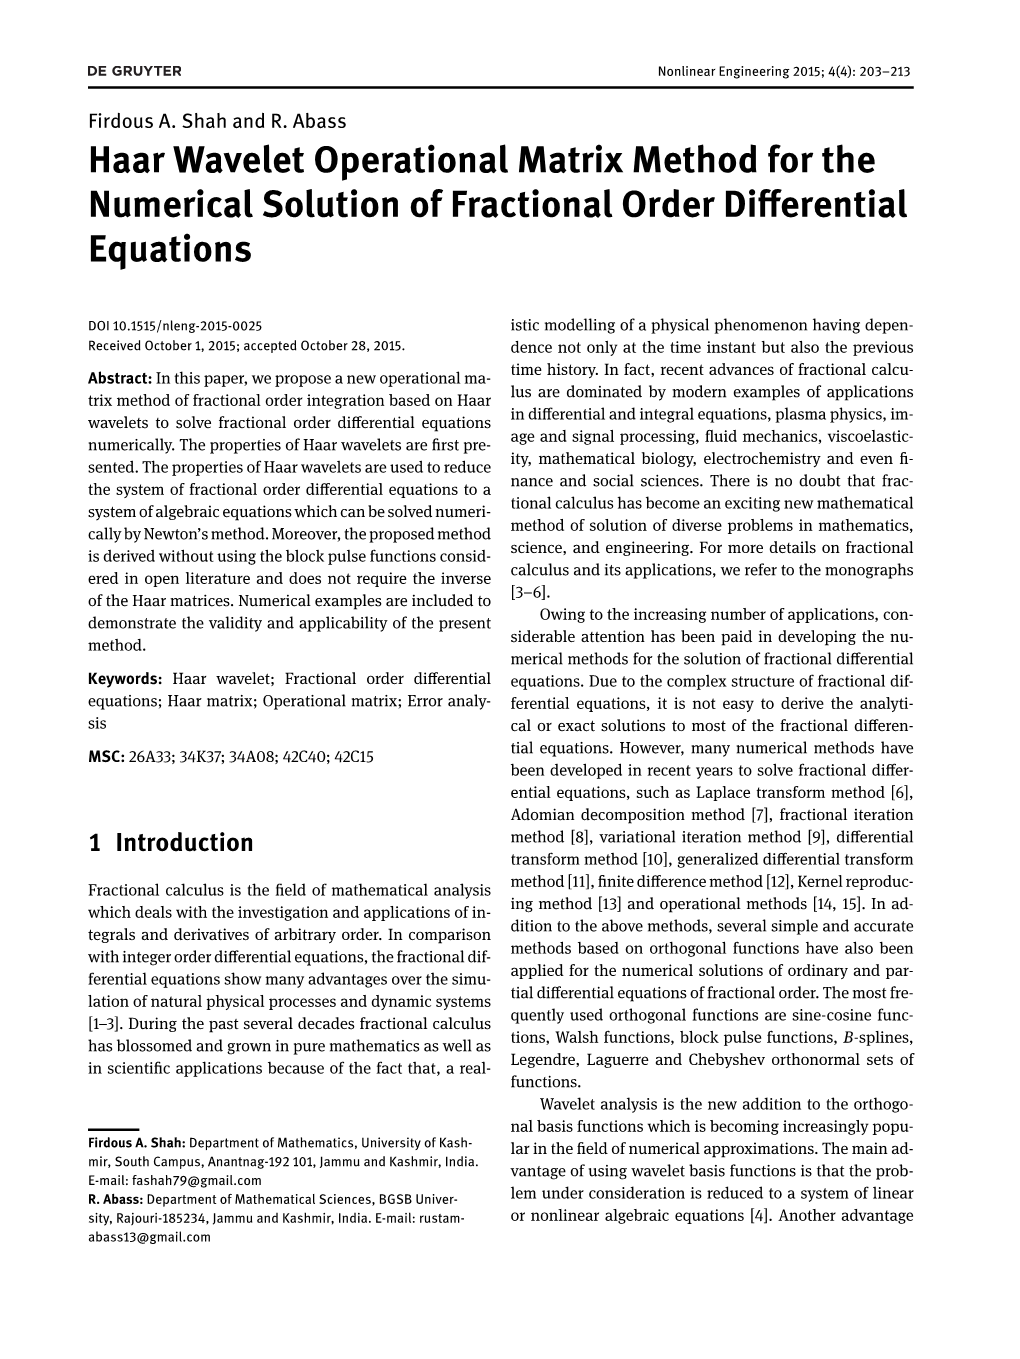 Haar Wavelet Operational Matrix Method for the Numerical Solution of Fractional Order Differential Equations